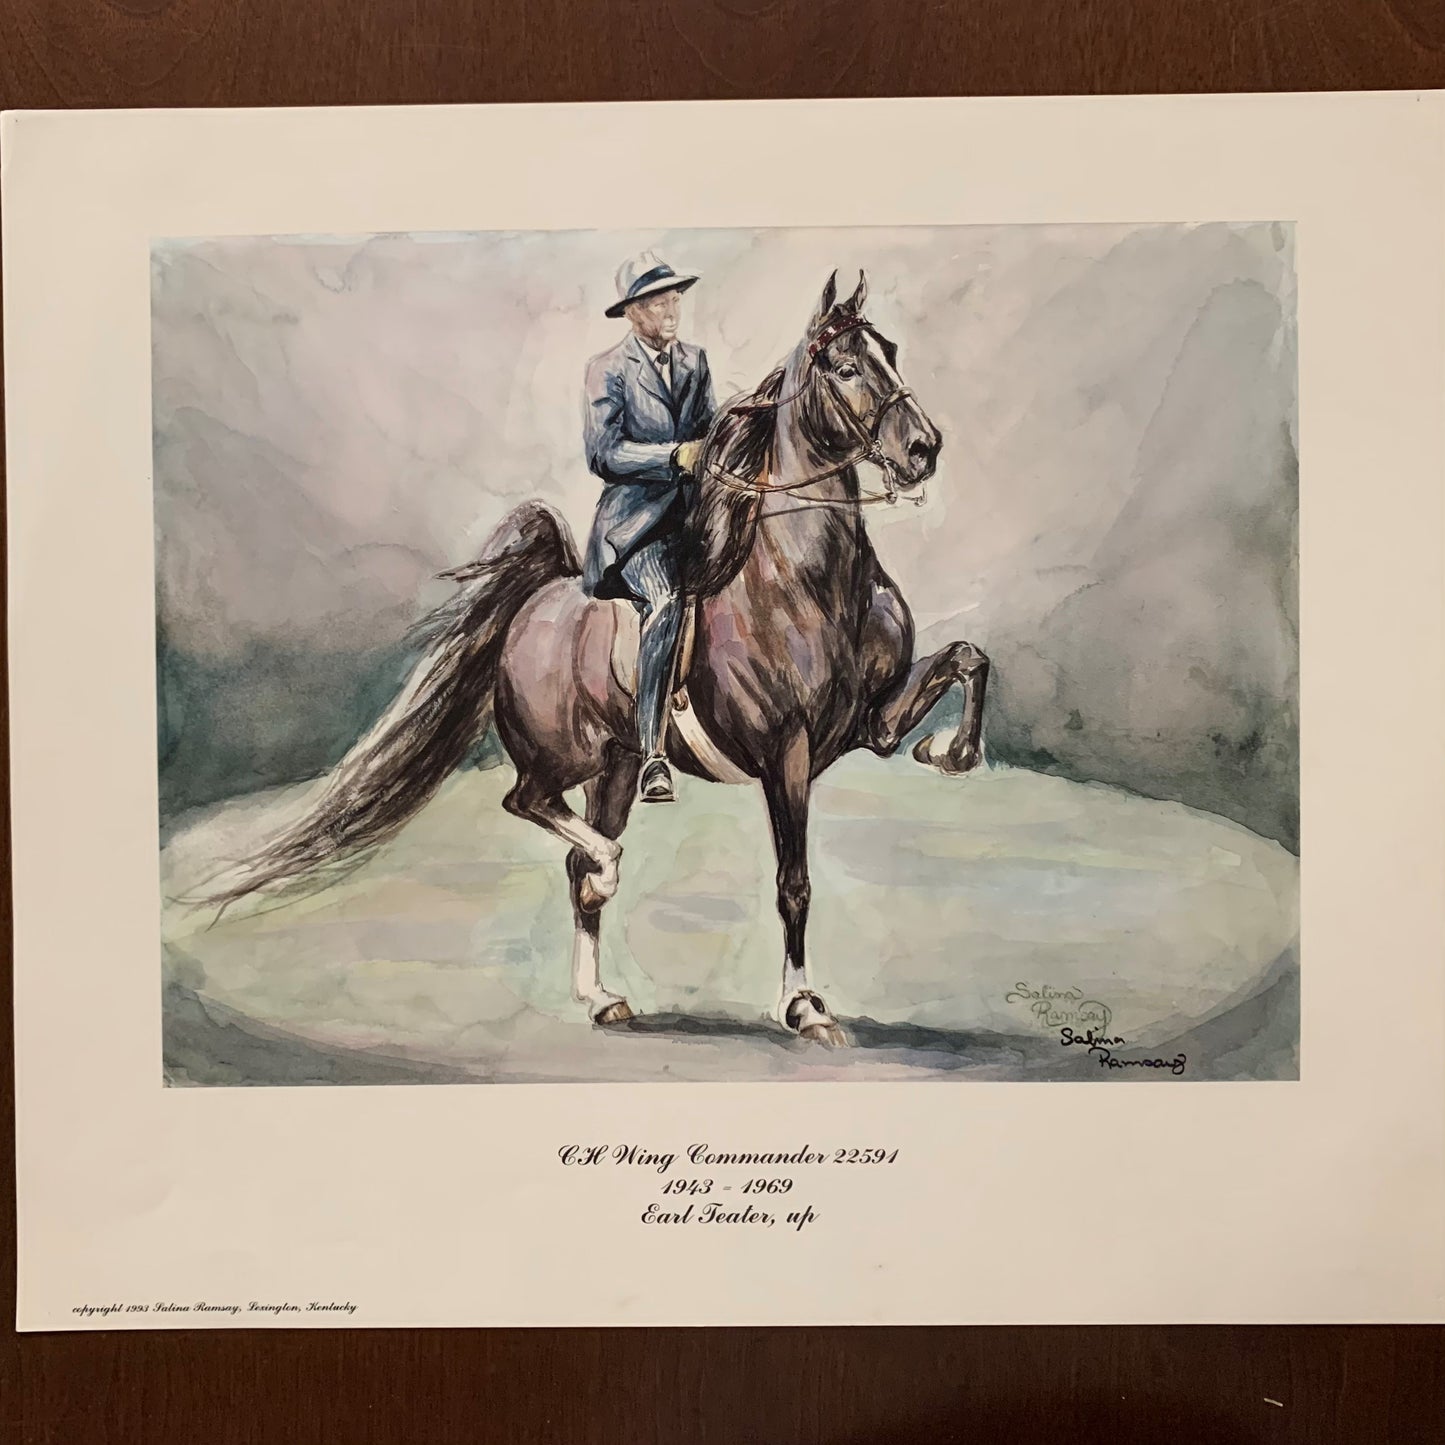 CH Wing Commander Print, Earl Teater, up